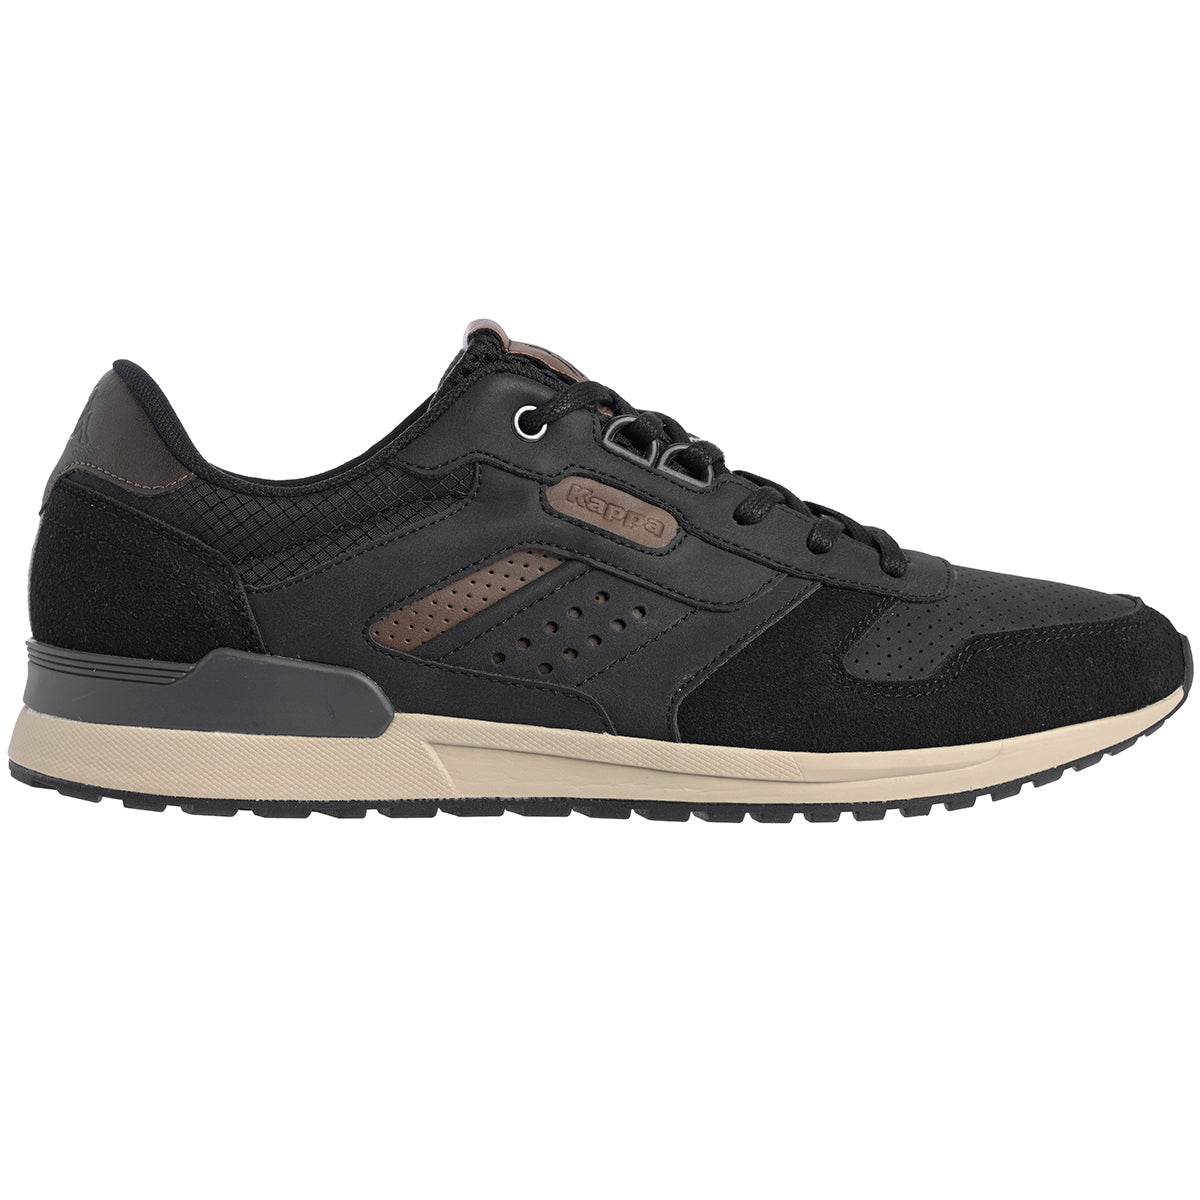 Baskets Midiano noir homme